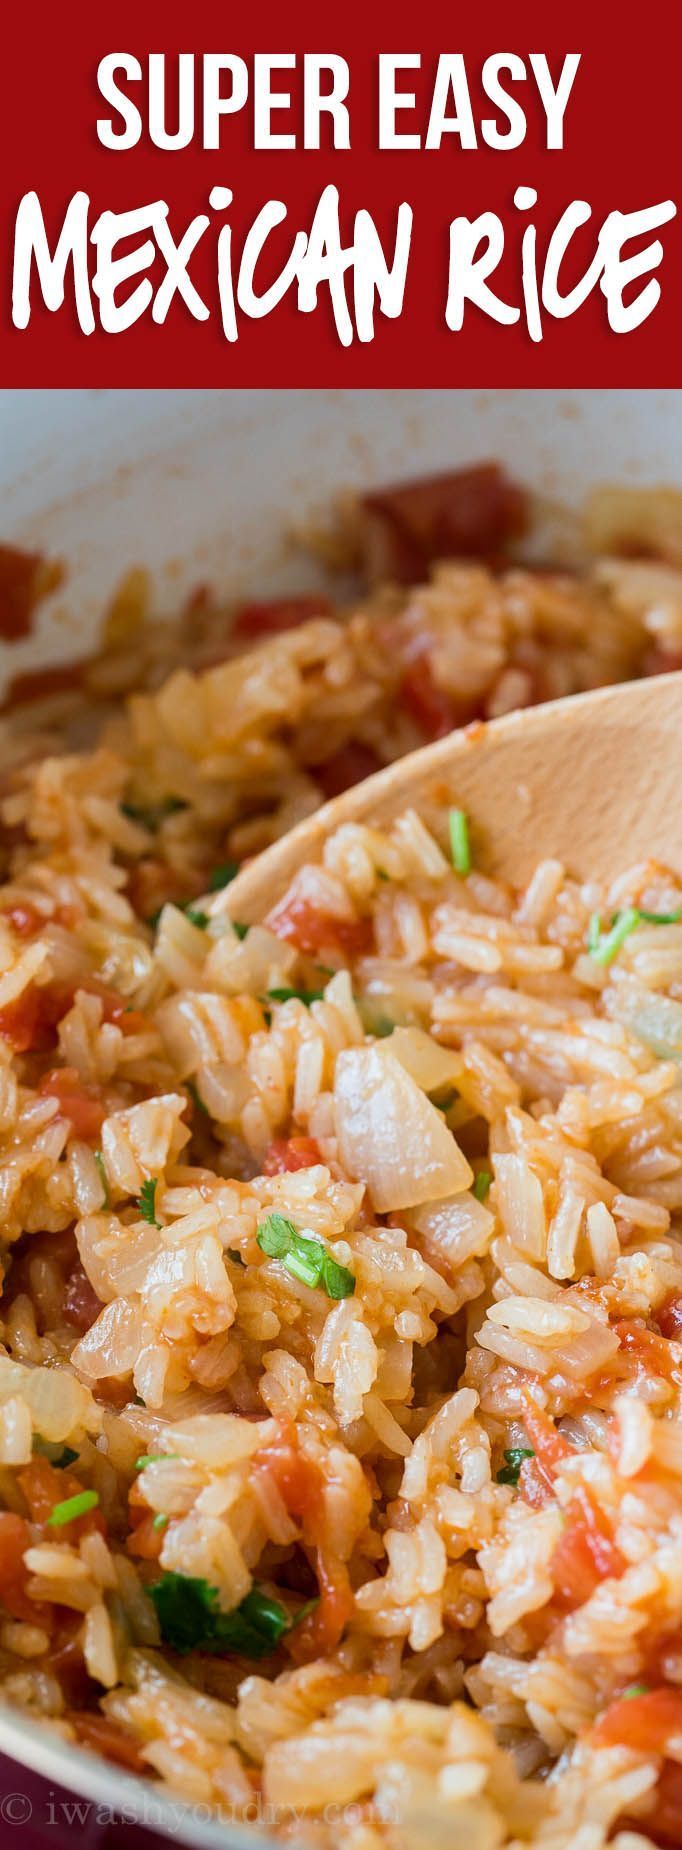 Easy Mexican Rice -   23 mexican rice recipes
 ideas